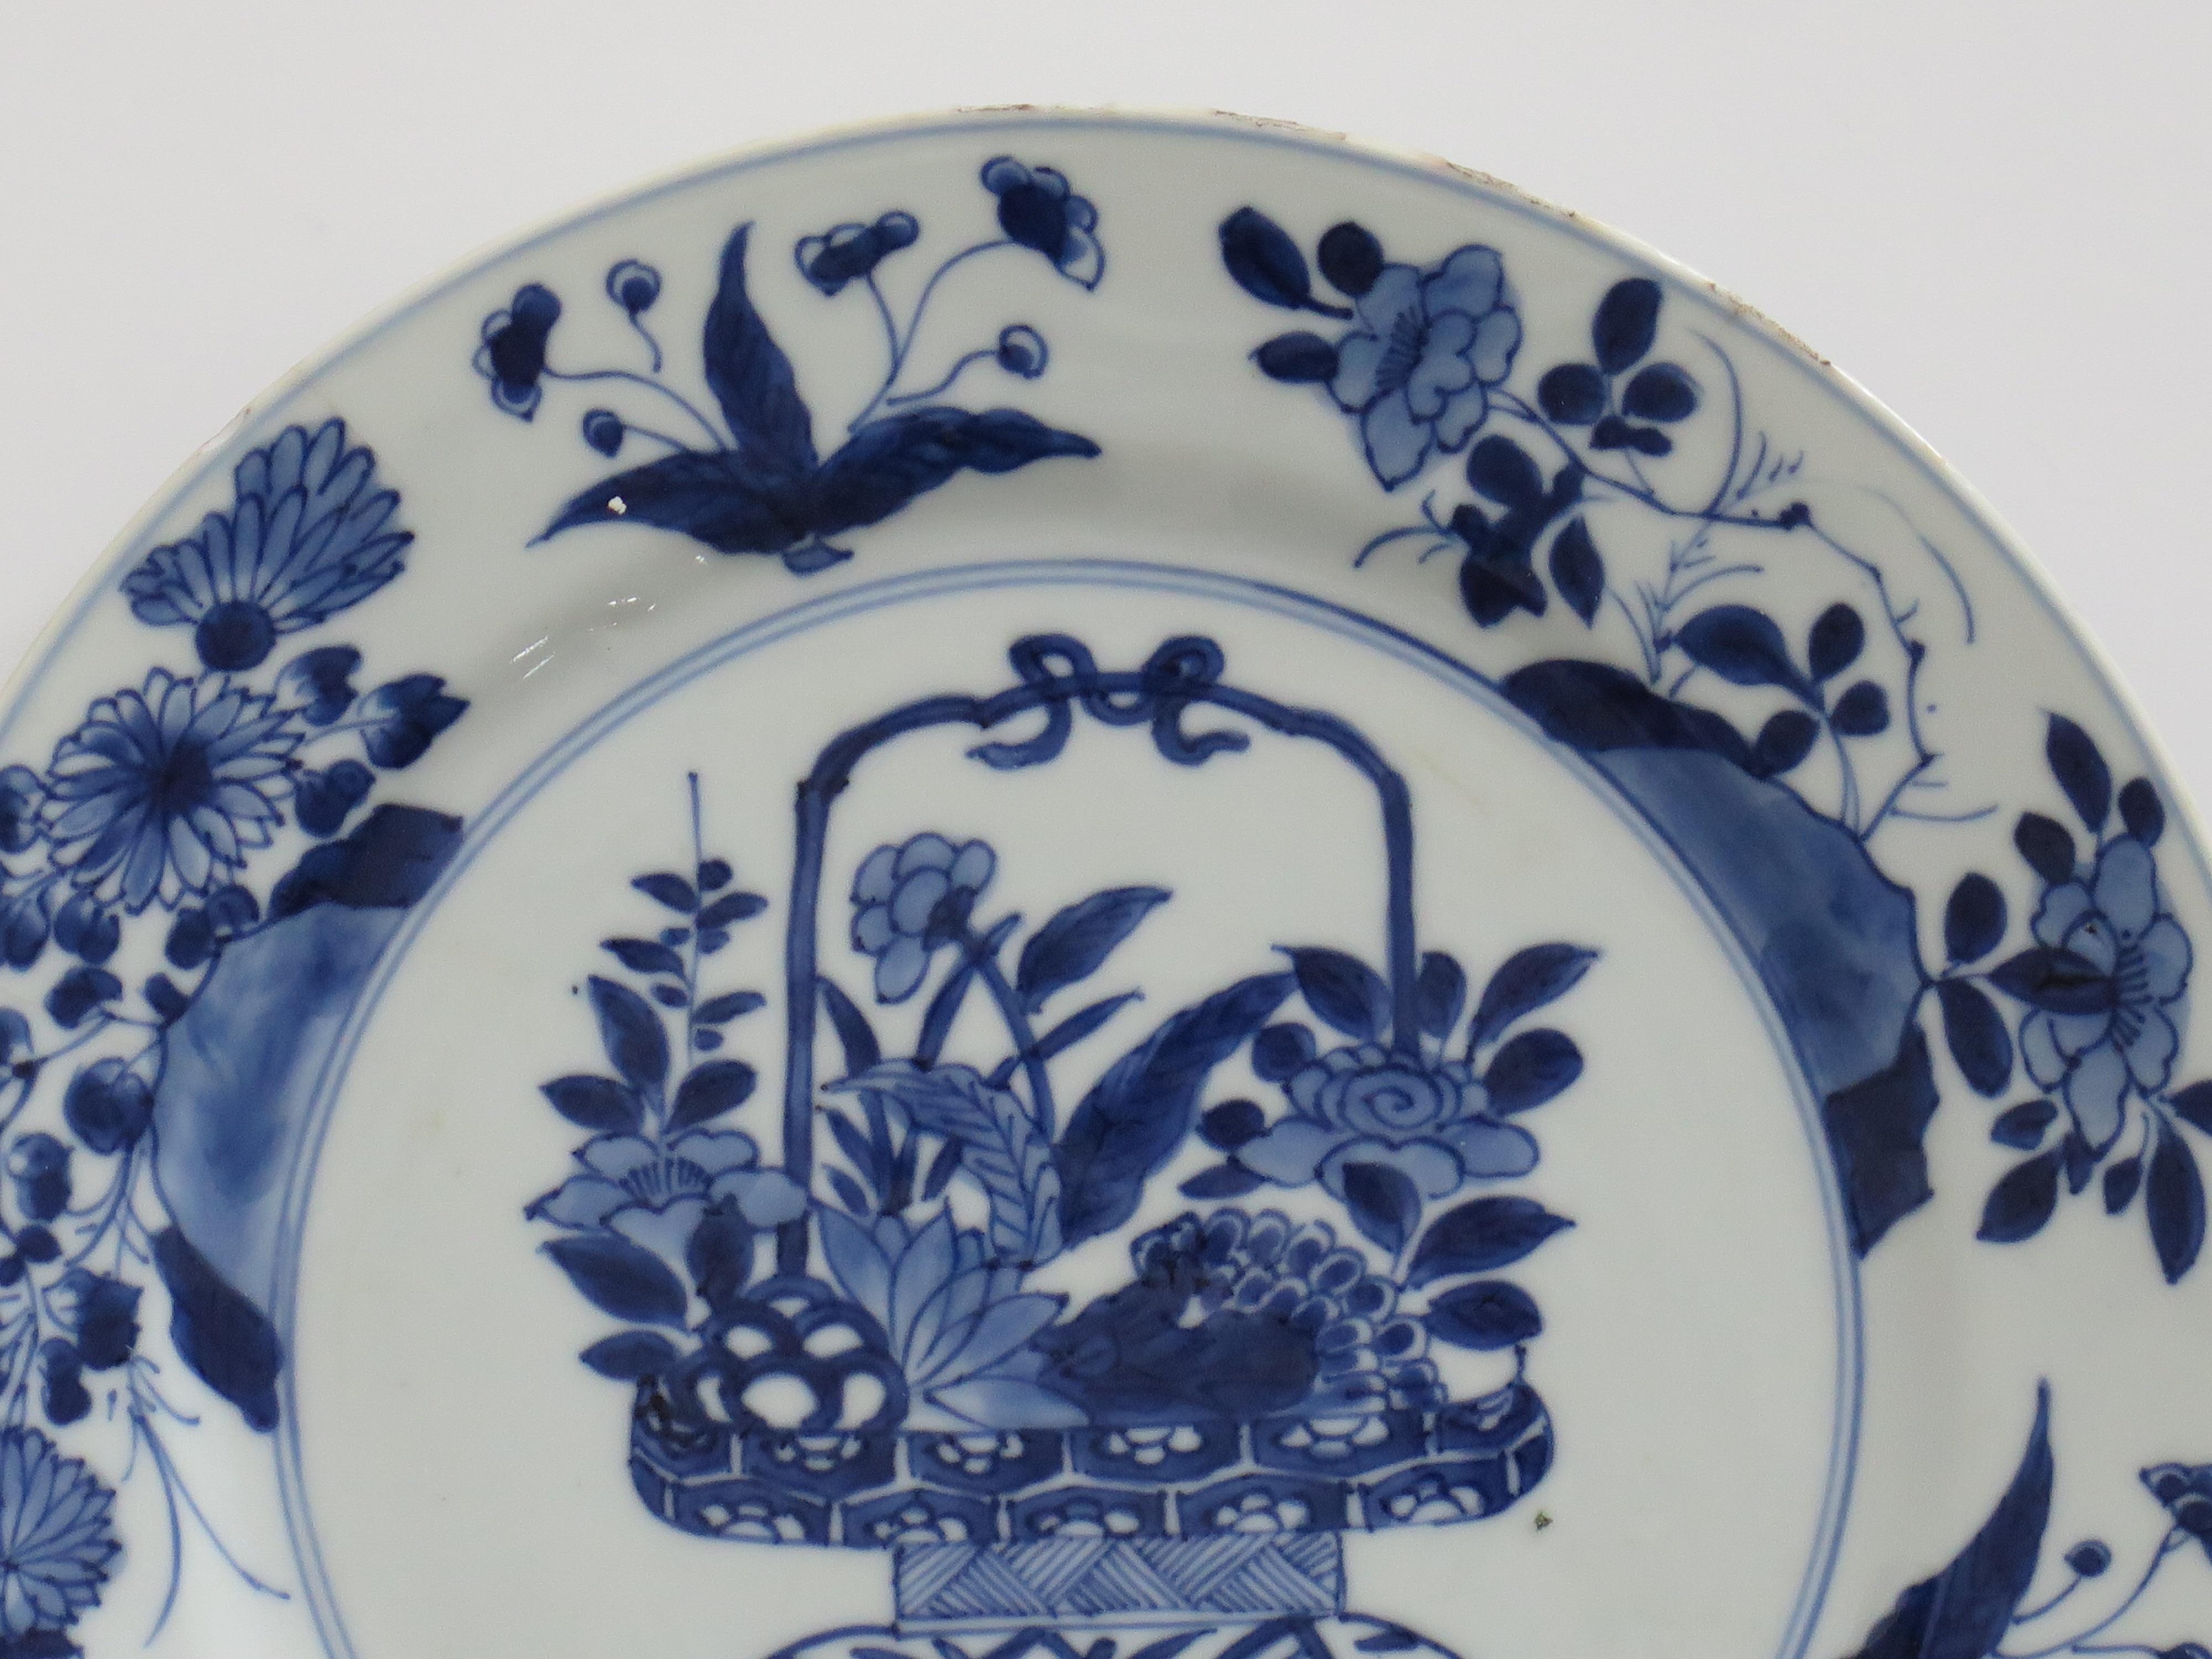 This is a beautifully hand-painted Chinese porcelain blue and white plate, from the Qing, Kangxi period, 1662-1722.

The plate is finely potted with a carefully cut base rim and a lovely rich glassy, very light blue glaze and very white porcelain,